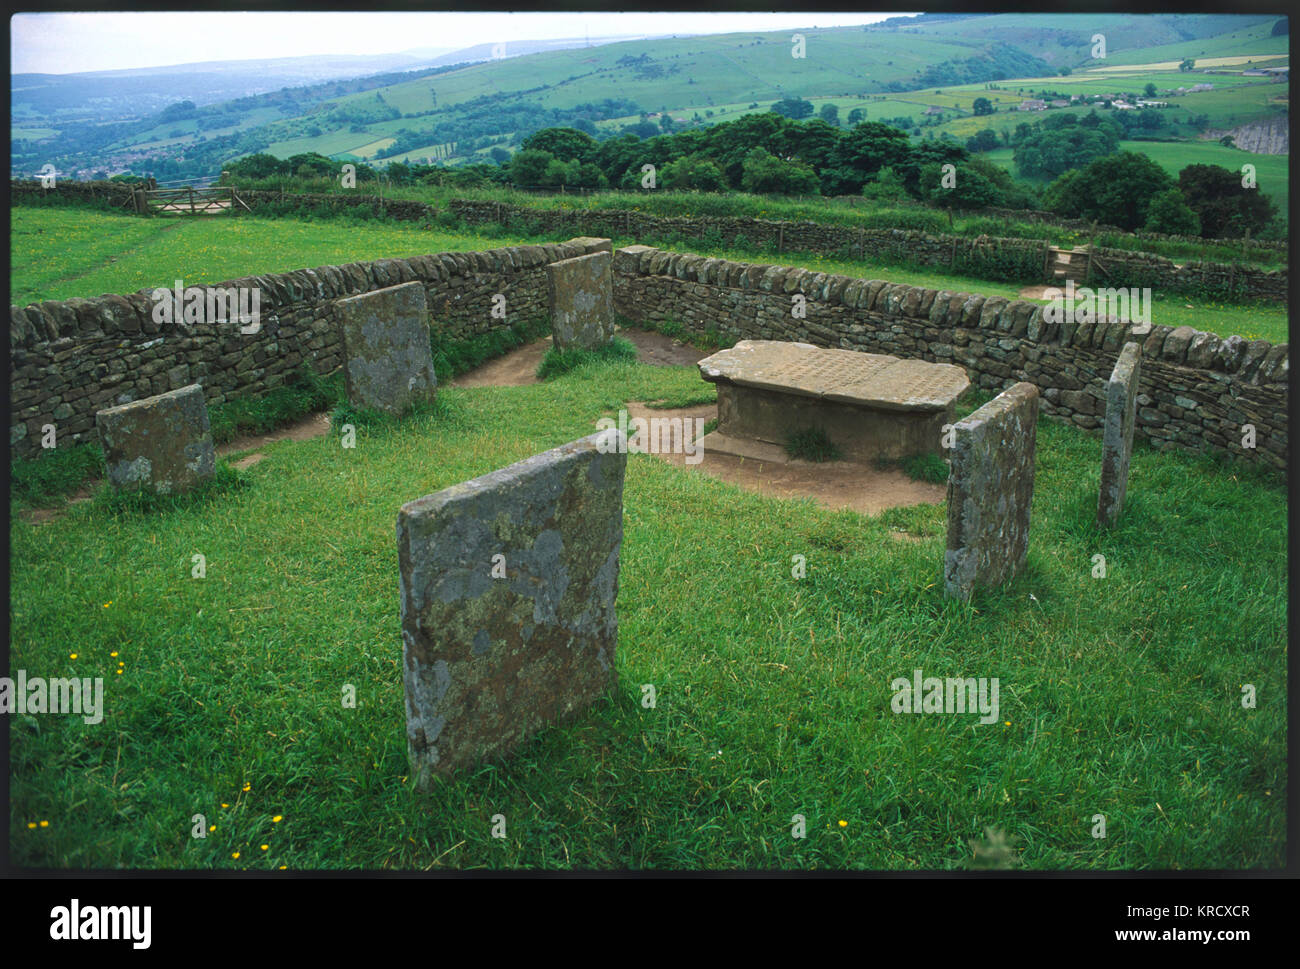 The graves of the Riley  family, on a hillside above  Eyam, Derbyshire, the village famous for having the Great  Plague in 1665-6 when five sixths  of the population died.     Date: 1995 Stock Photo